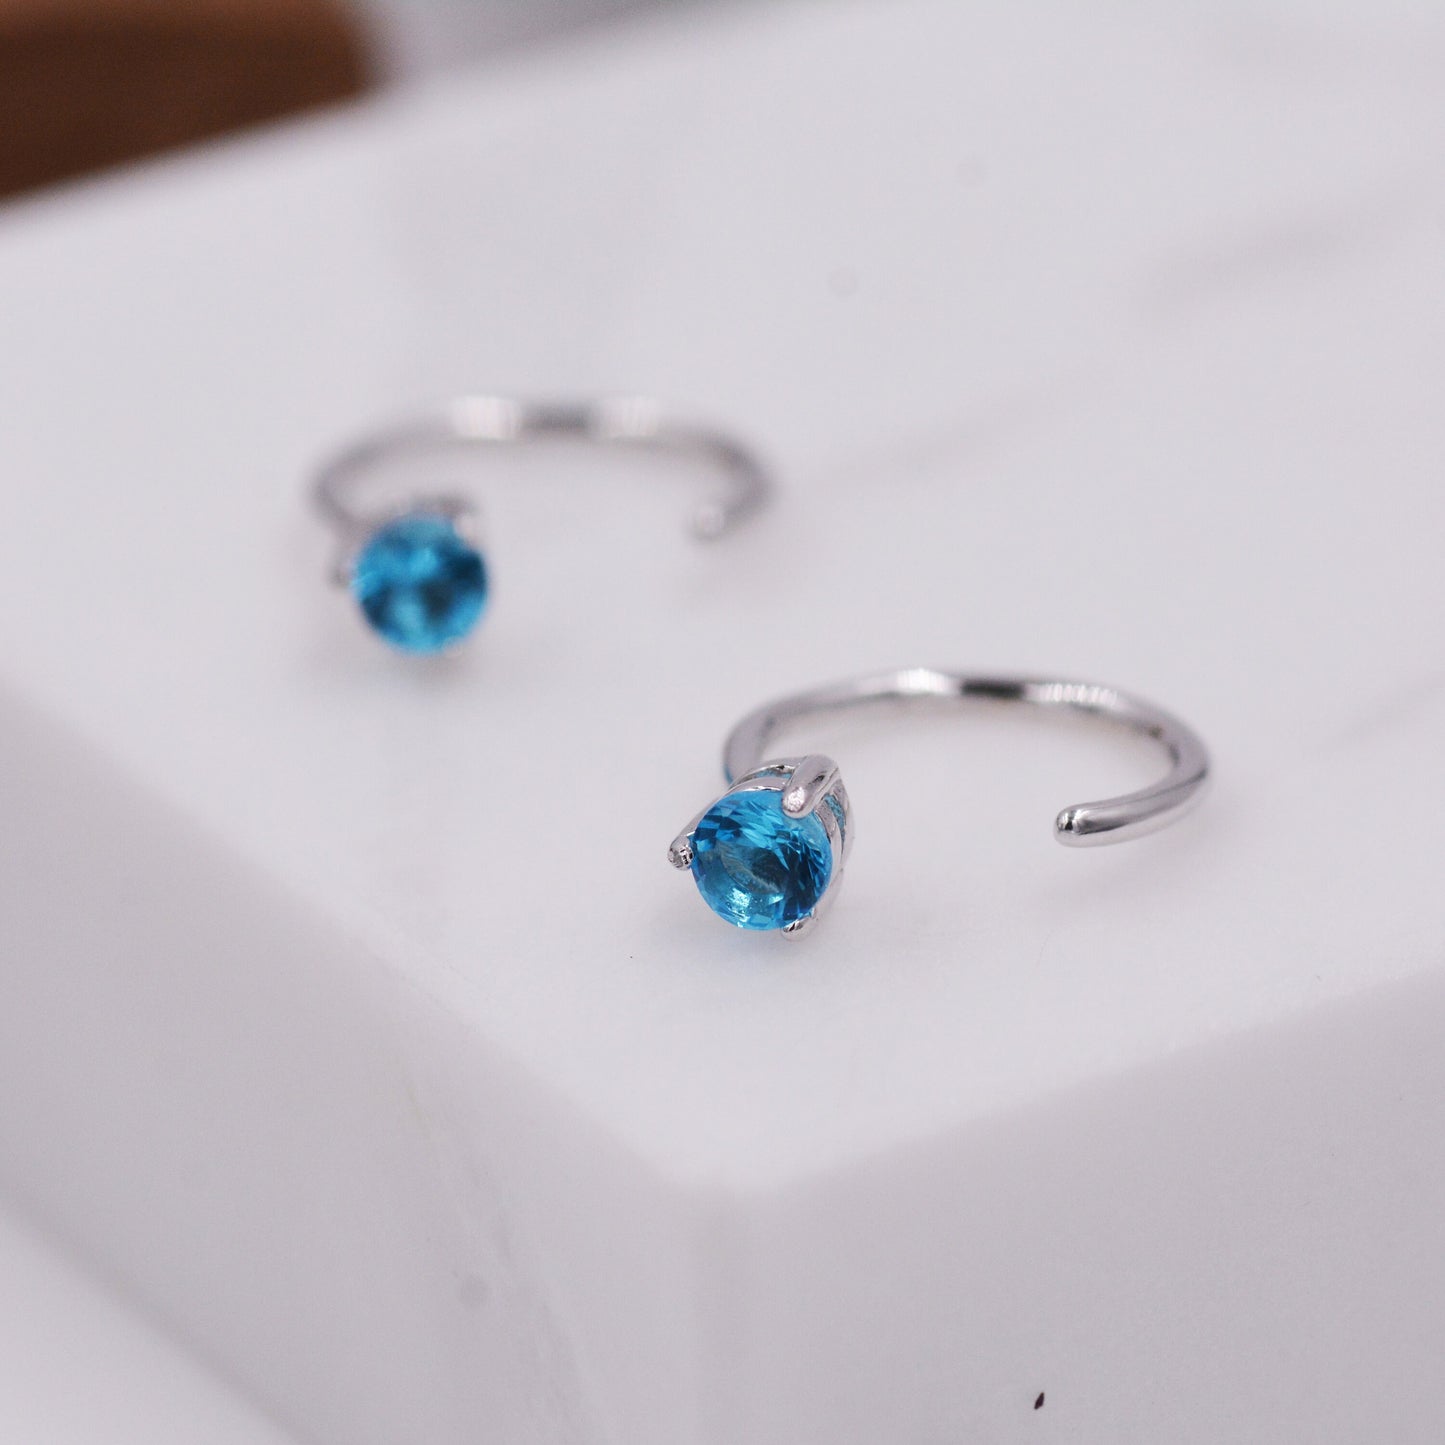 Aquamarine Blue Crystal Huggie Hoop Threader Earrings in Sterling Silver, 3mm Three Prong, Gold or Silver, Pull Through Open Hoops